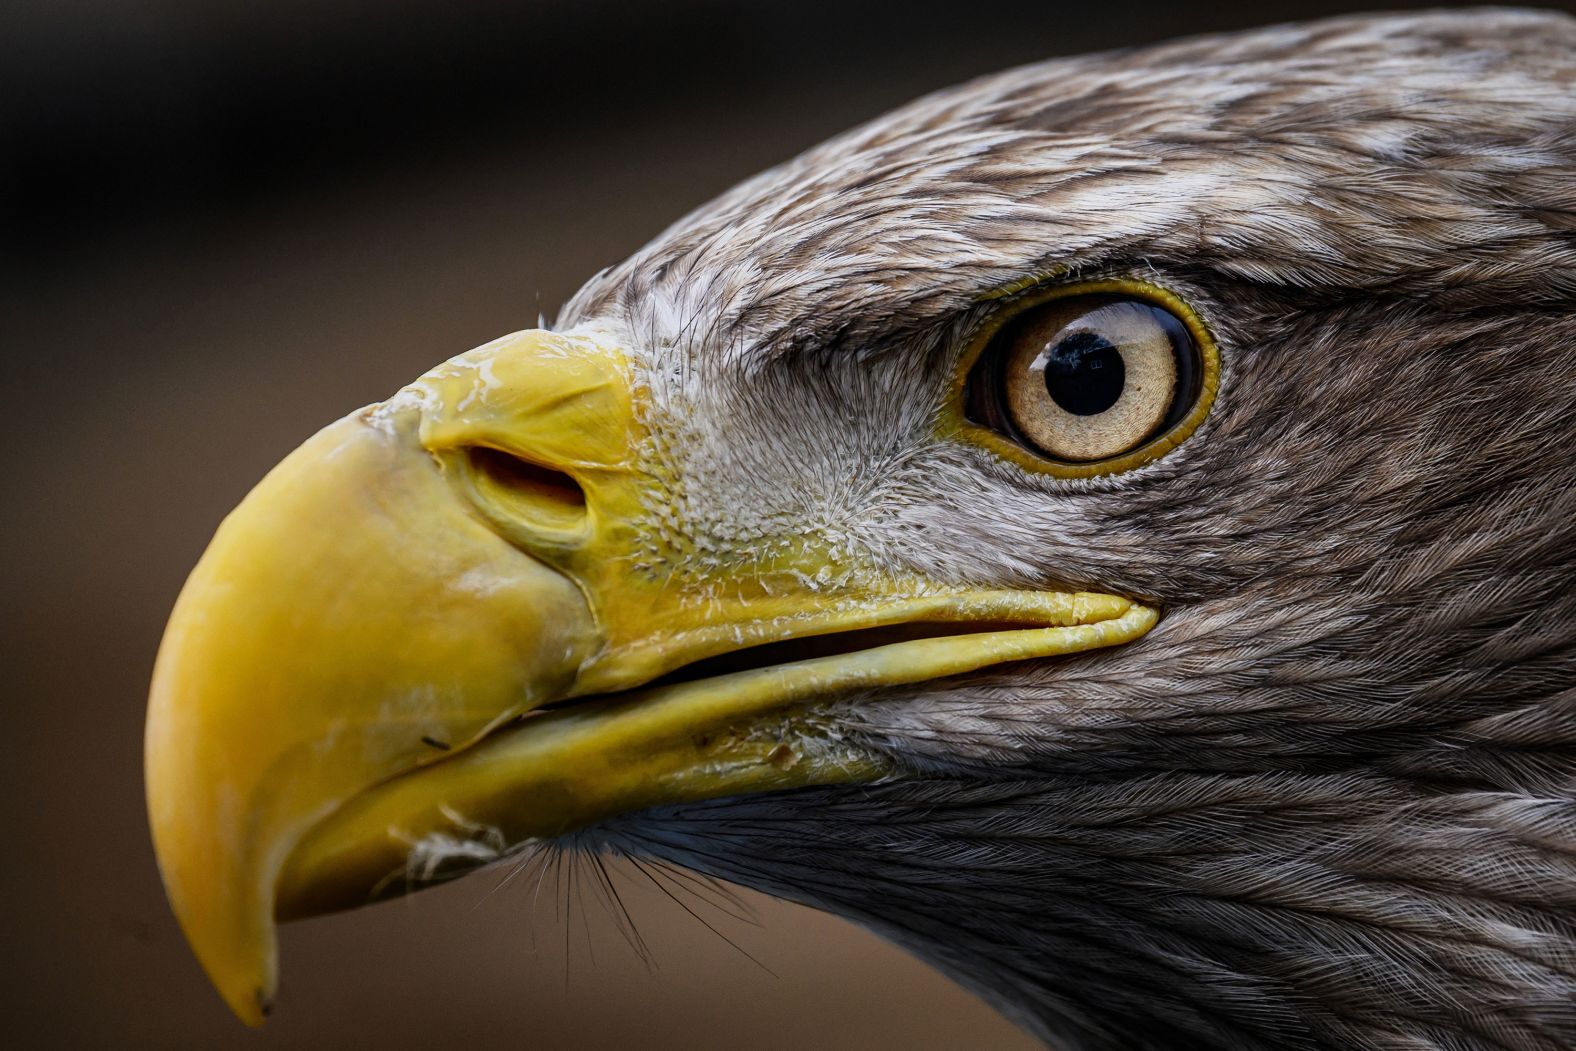 A white-tailed eagle named Fletcher is seen at the Leman Eagles park in Sciez, France, on Thursday, March 28.